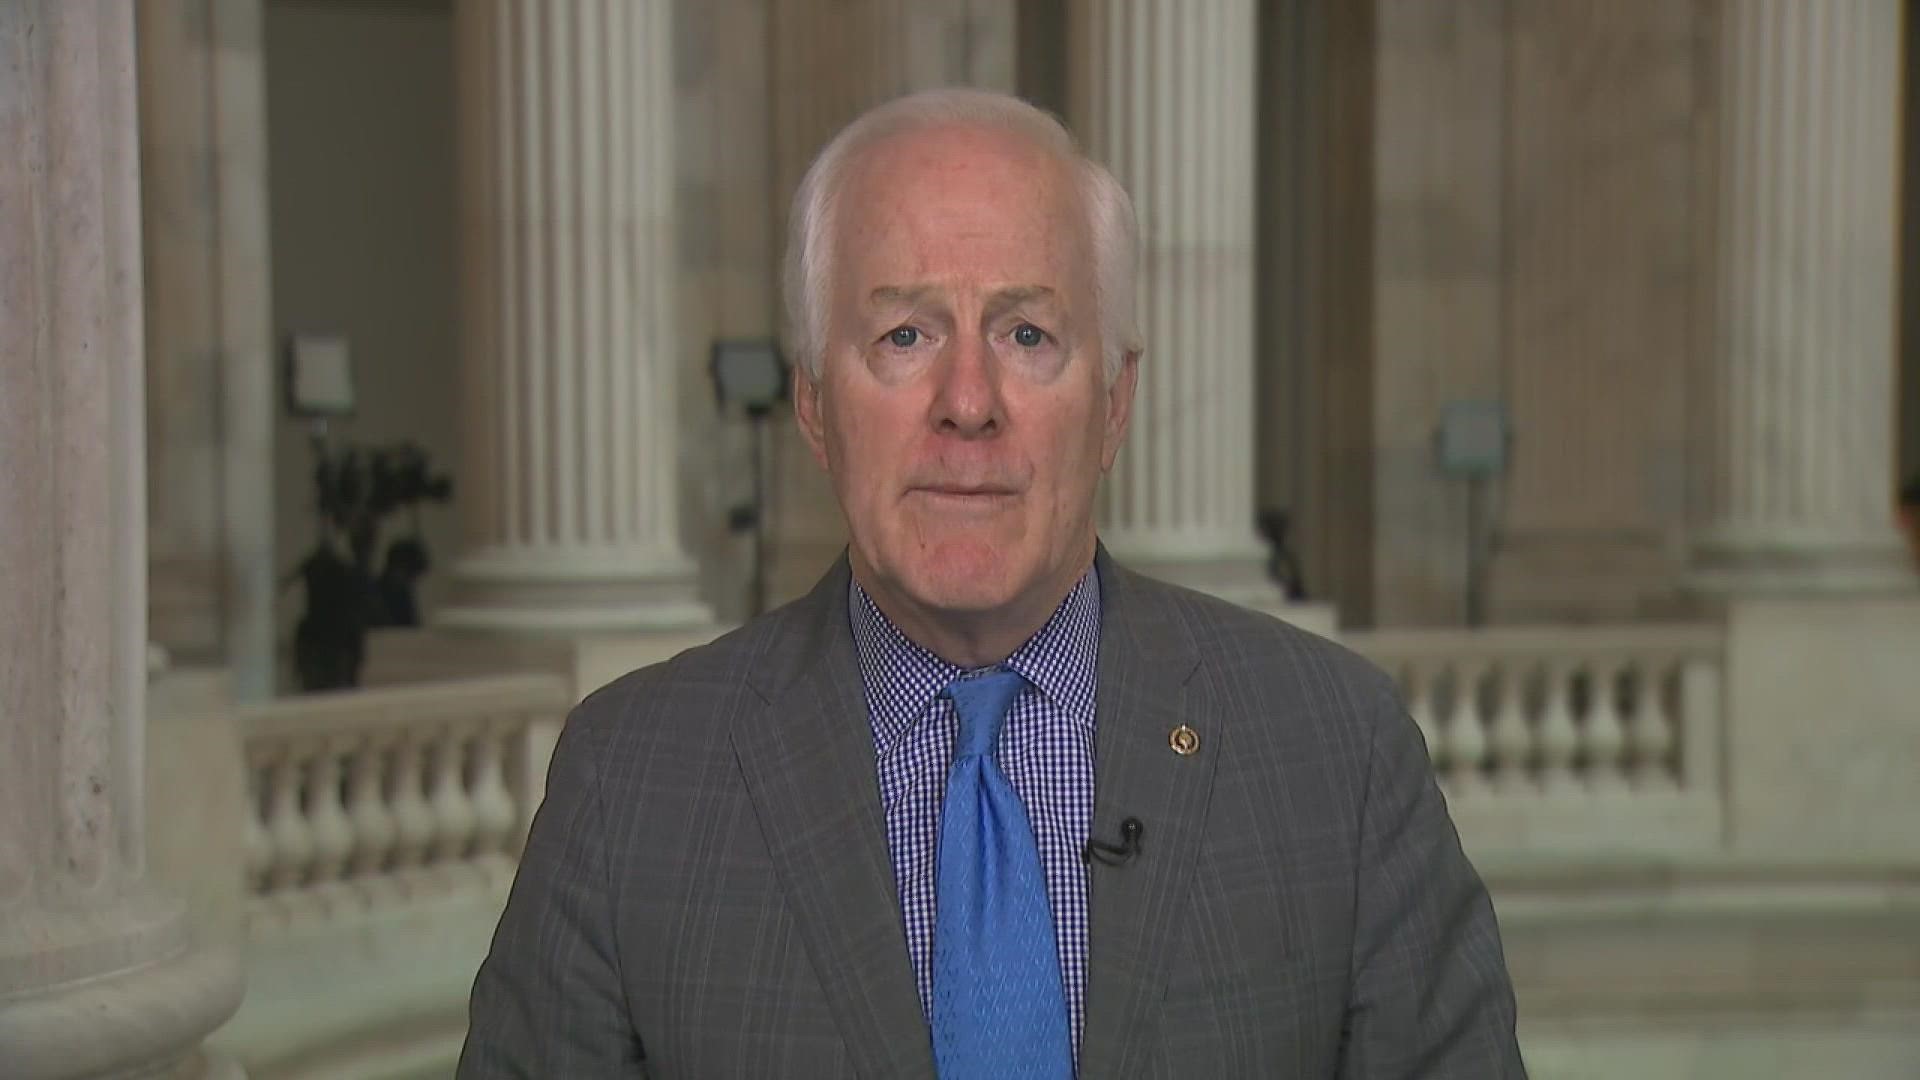 "Putin has ripped his mask off, and we now see him for what he is – personification of evil for his unprovoked attack against Ukrainians," Sen. Cornyn said.